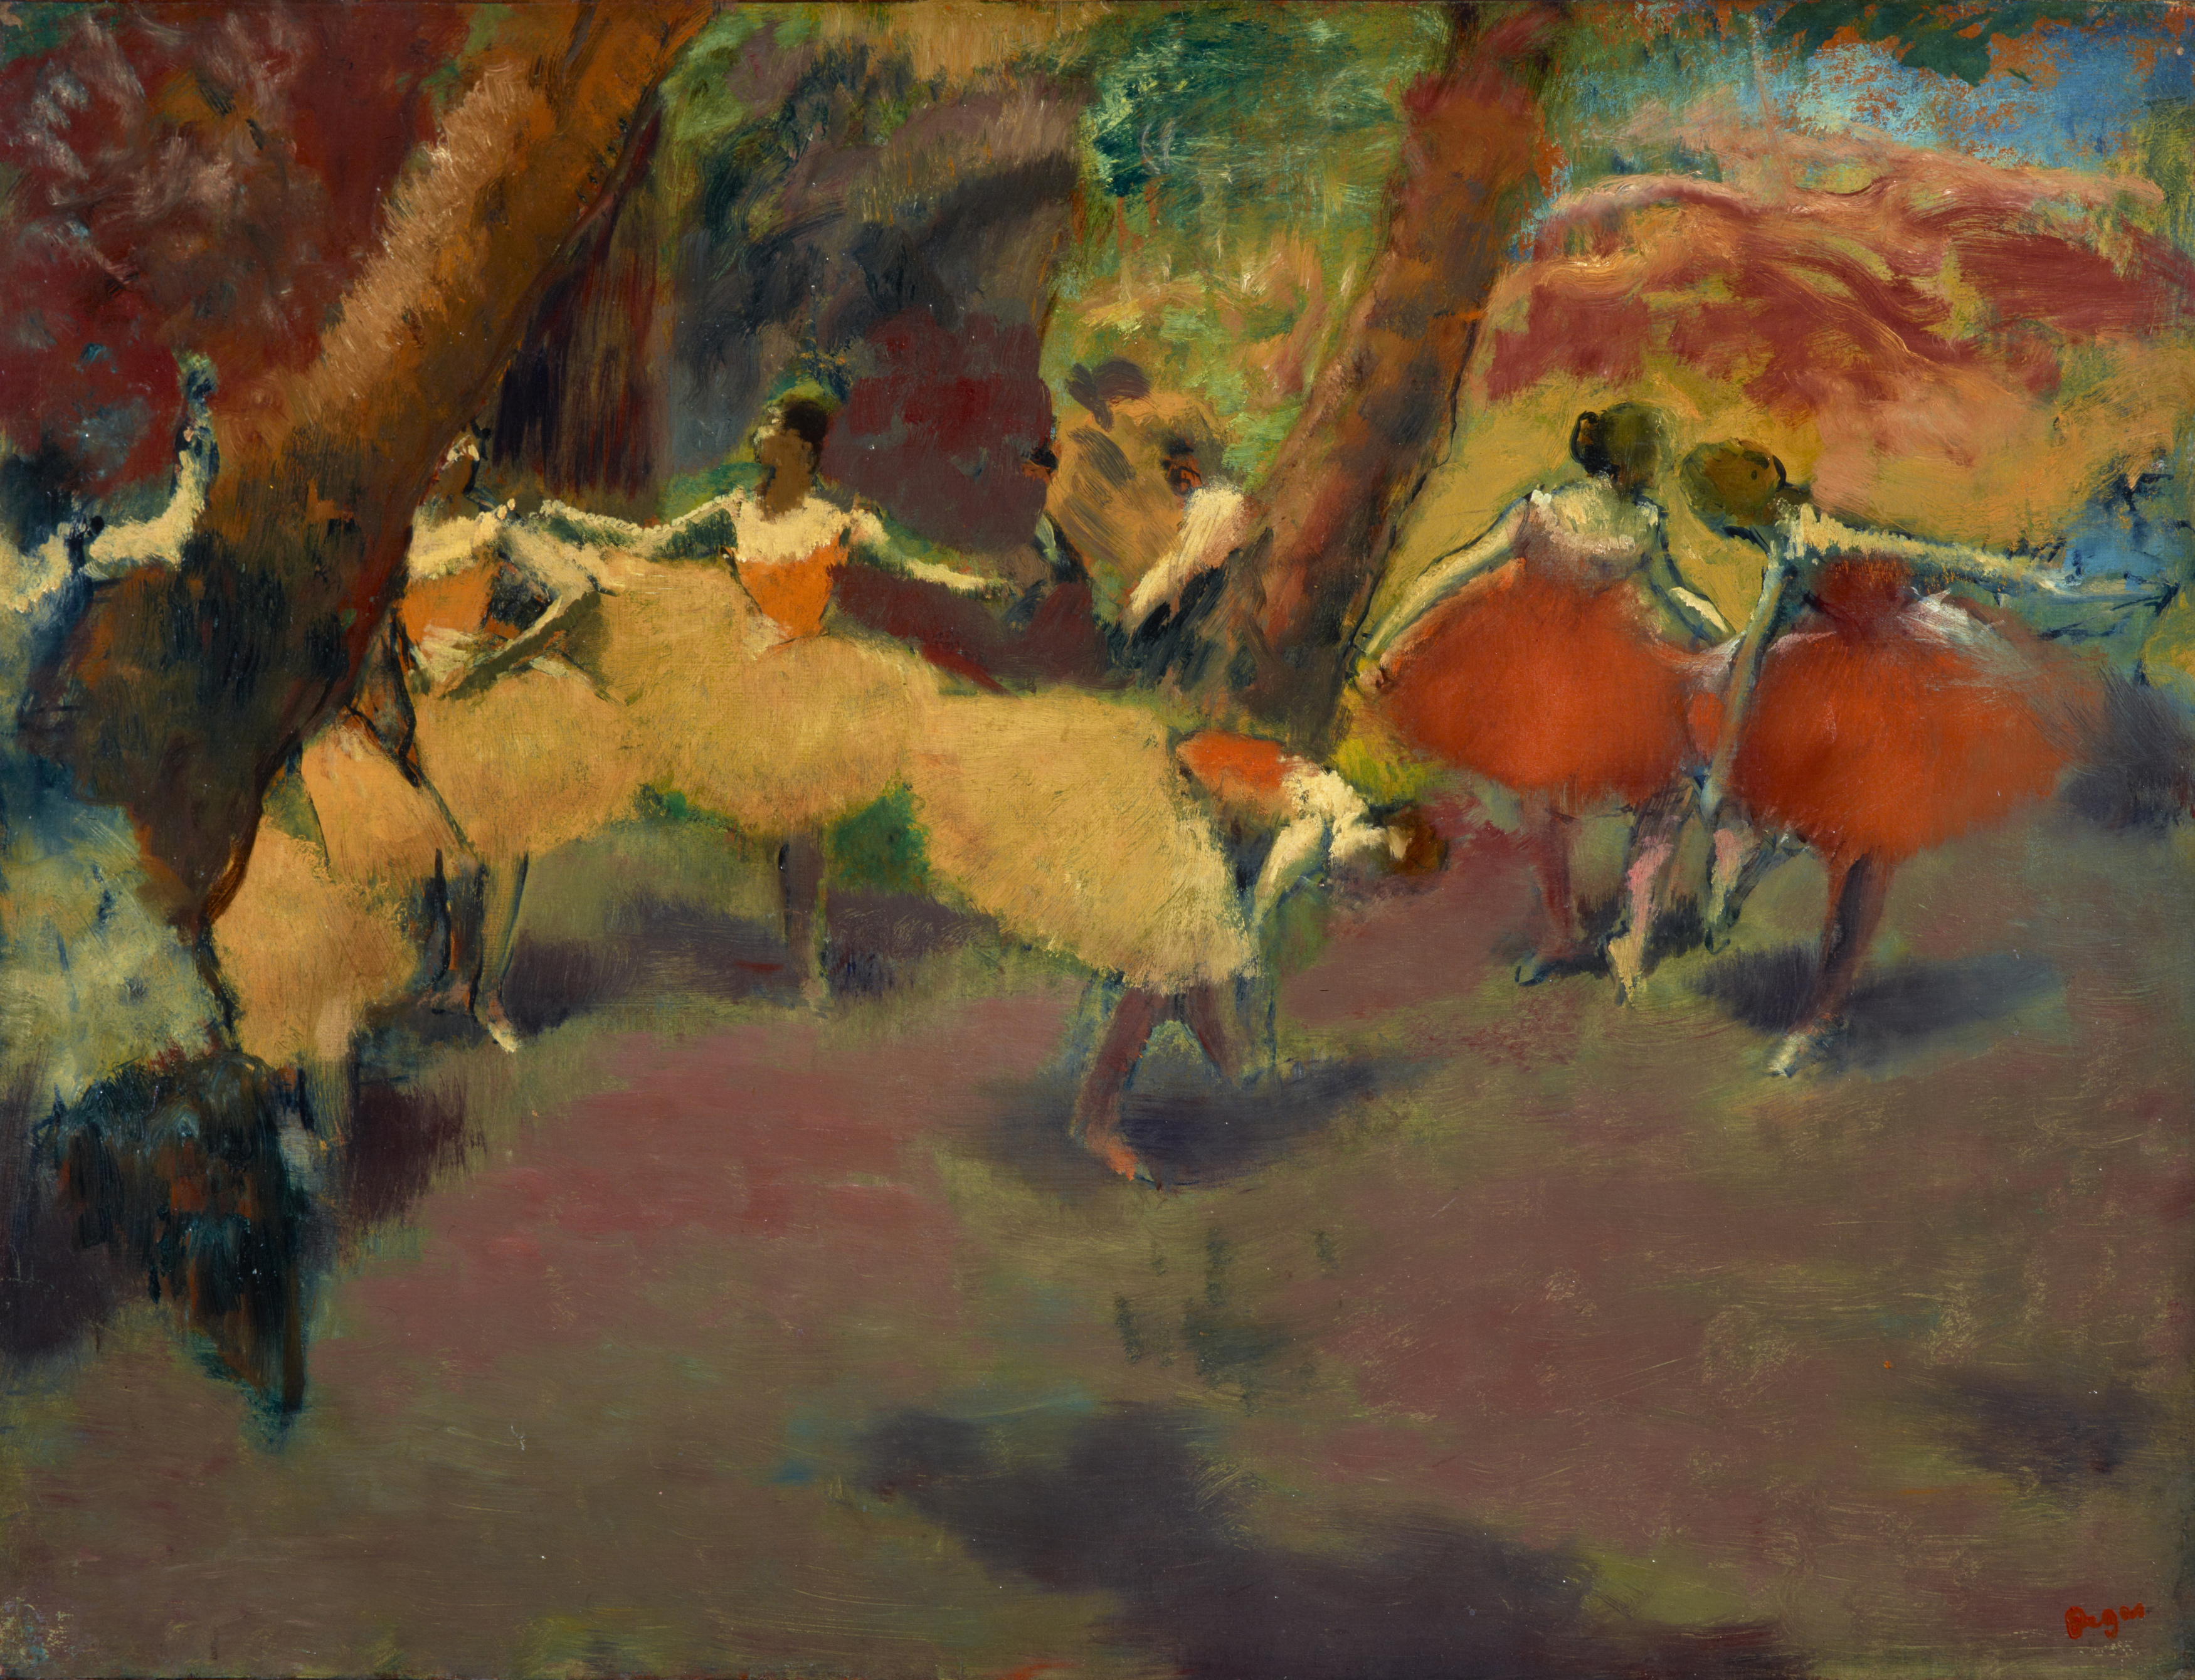 Before the Performance by Edgar Degas - About 1896 - 1898 - 47.60 x 62.50 cm National Galleries of Scotland